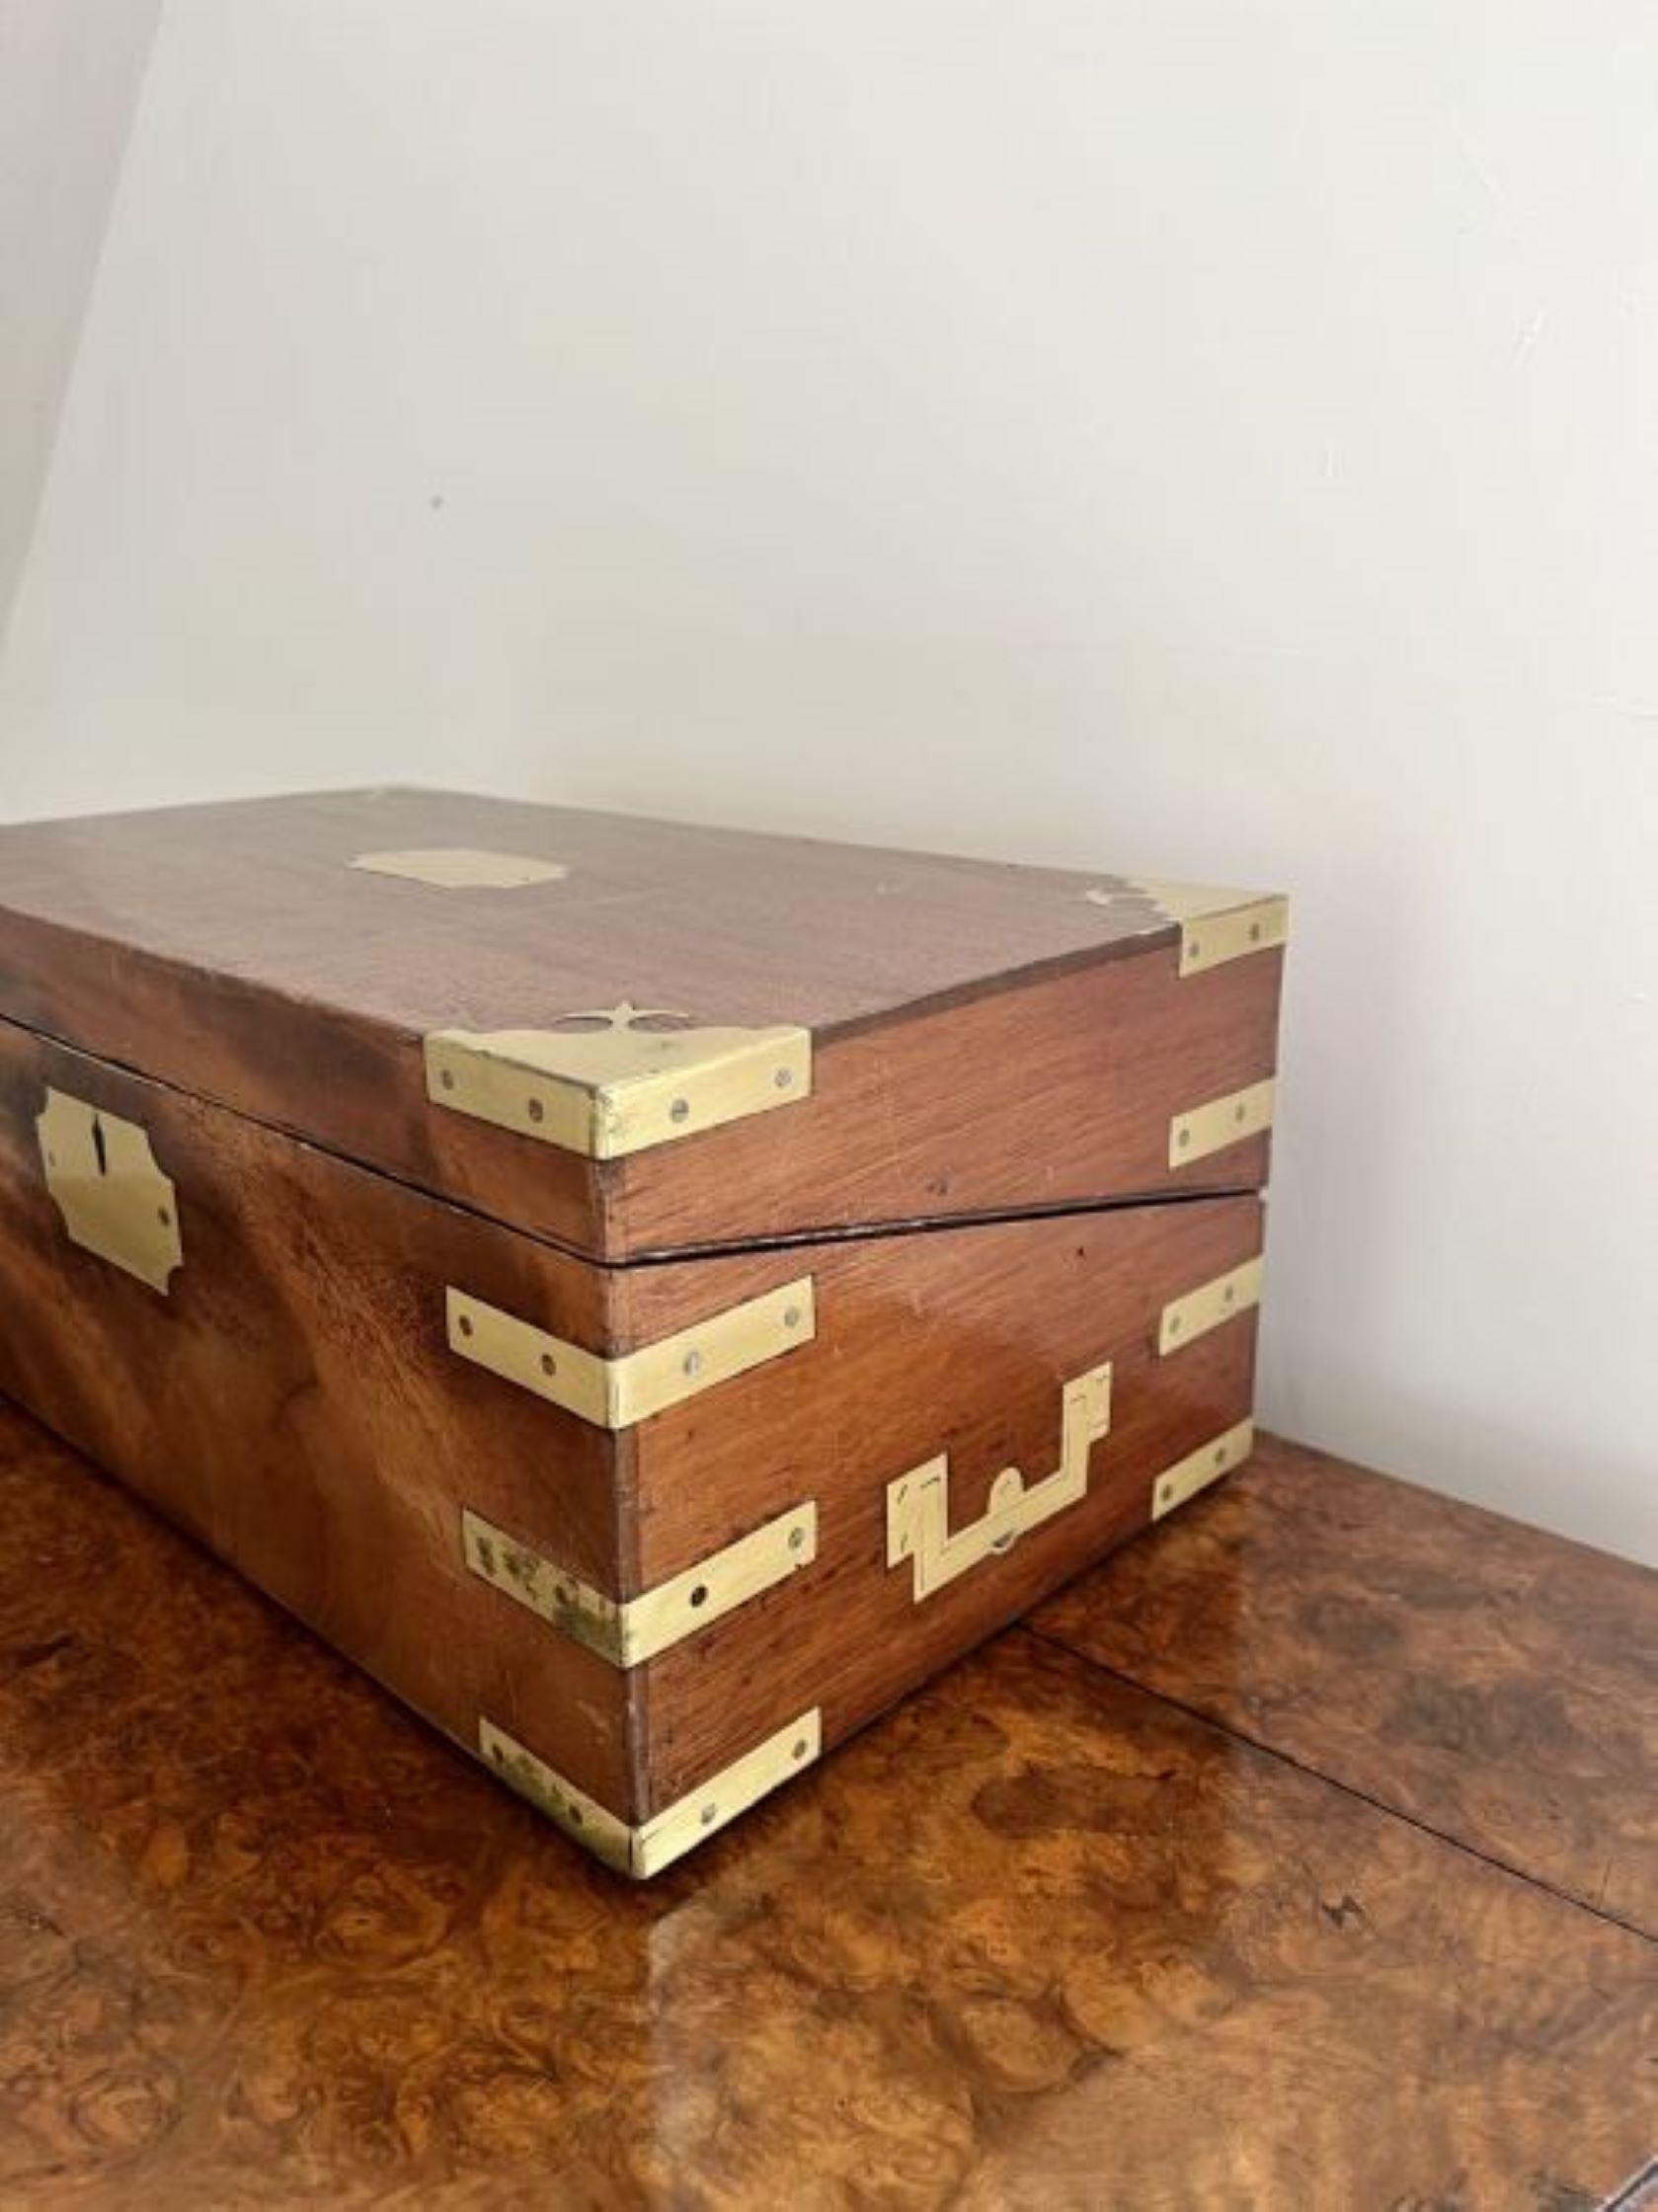 Lovely antique Victorian burr walnut and brass bound writing box having a quality burr walnut writing box with brass mounts, opening up to reveal a writing slope with upholstered green felt, lifting up to reveal a storage compartment and three